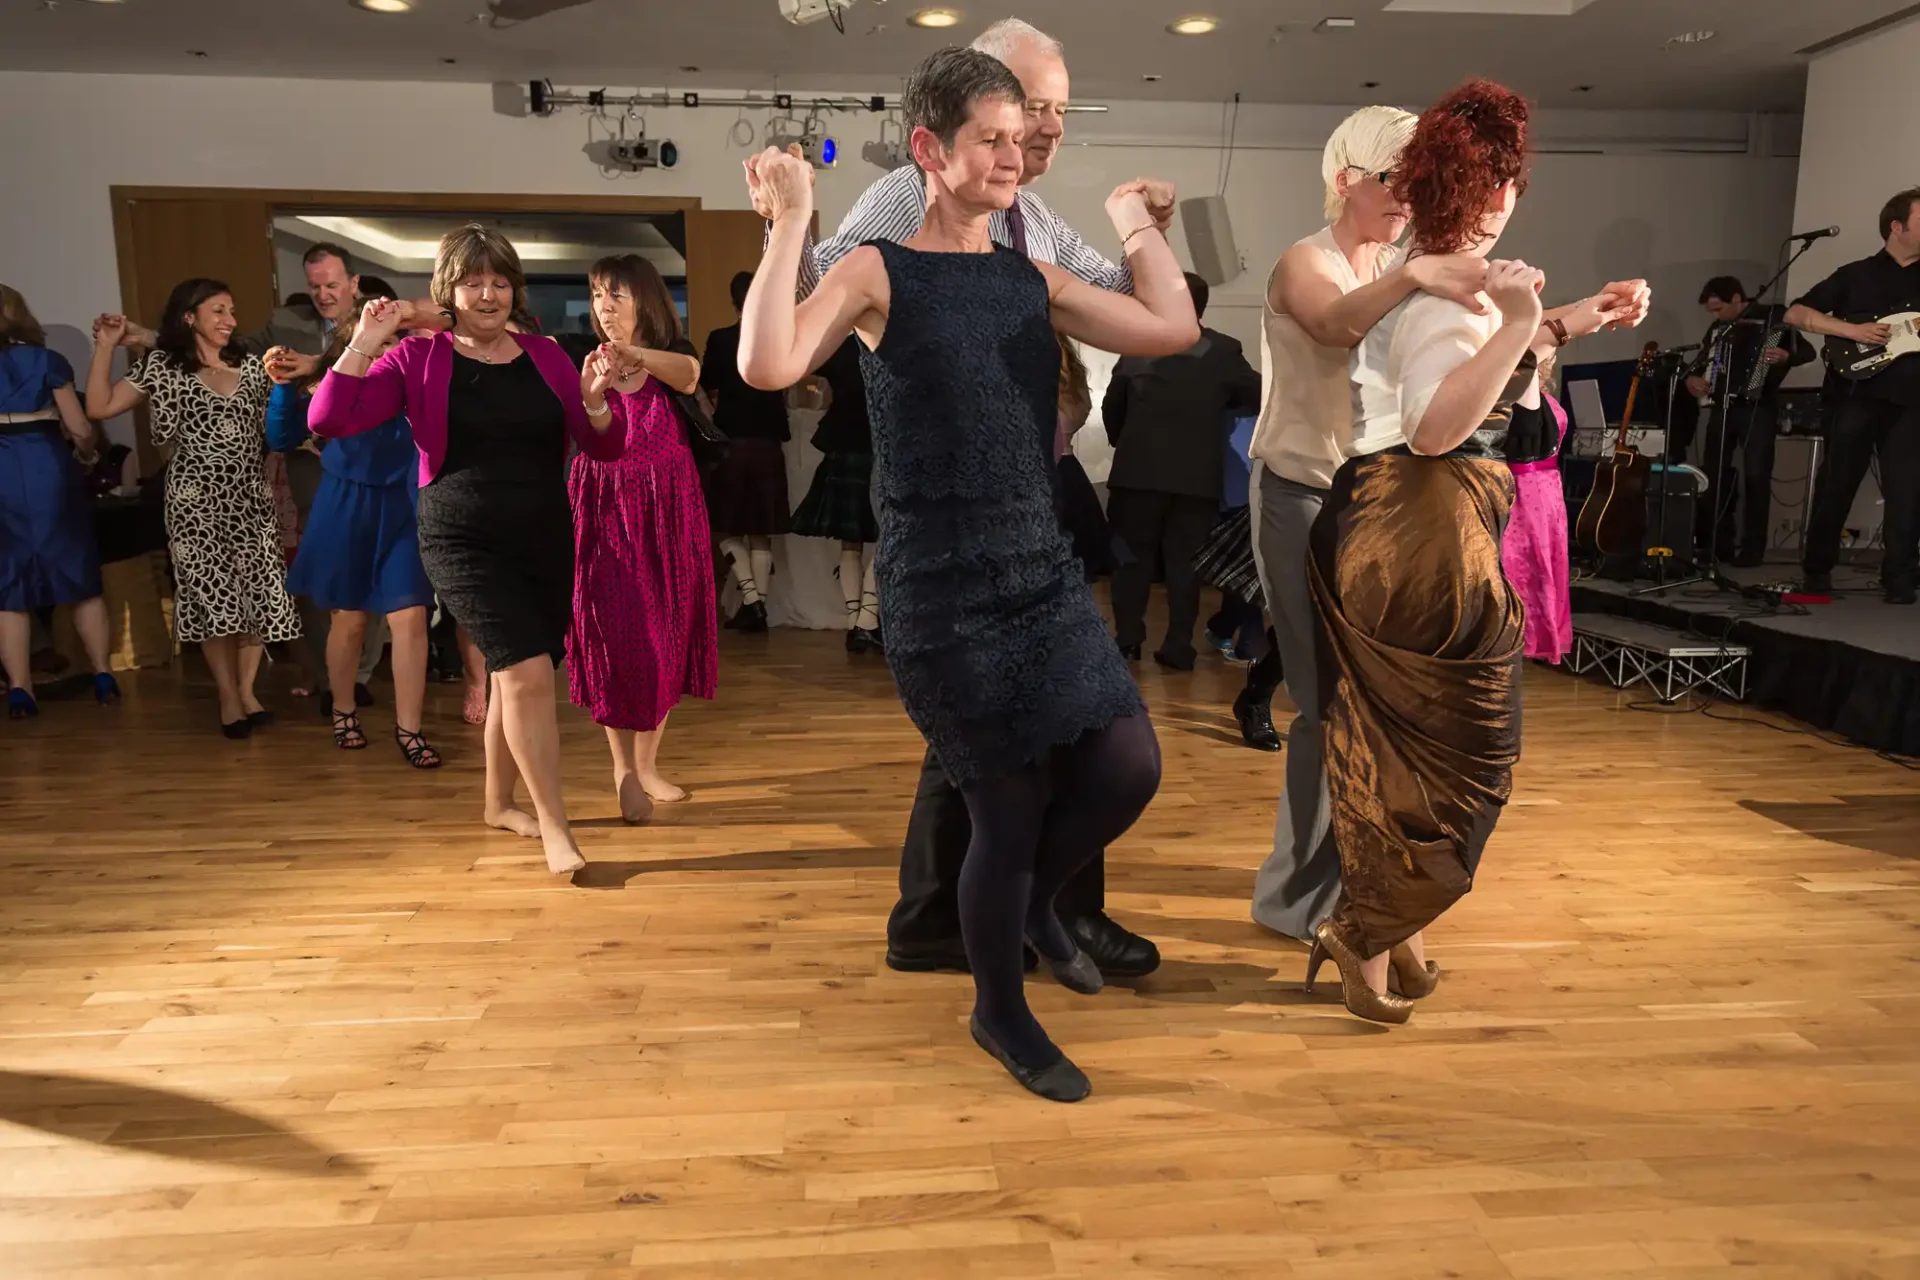 Adults enjoying a lively dance at a party in a ballroom with a wooden floor, as a band plays in the background.